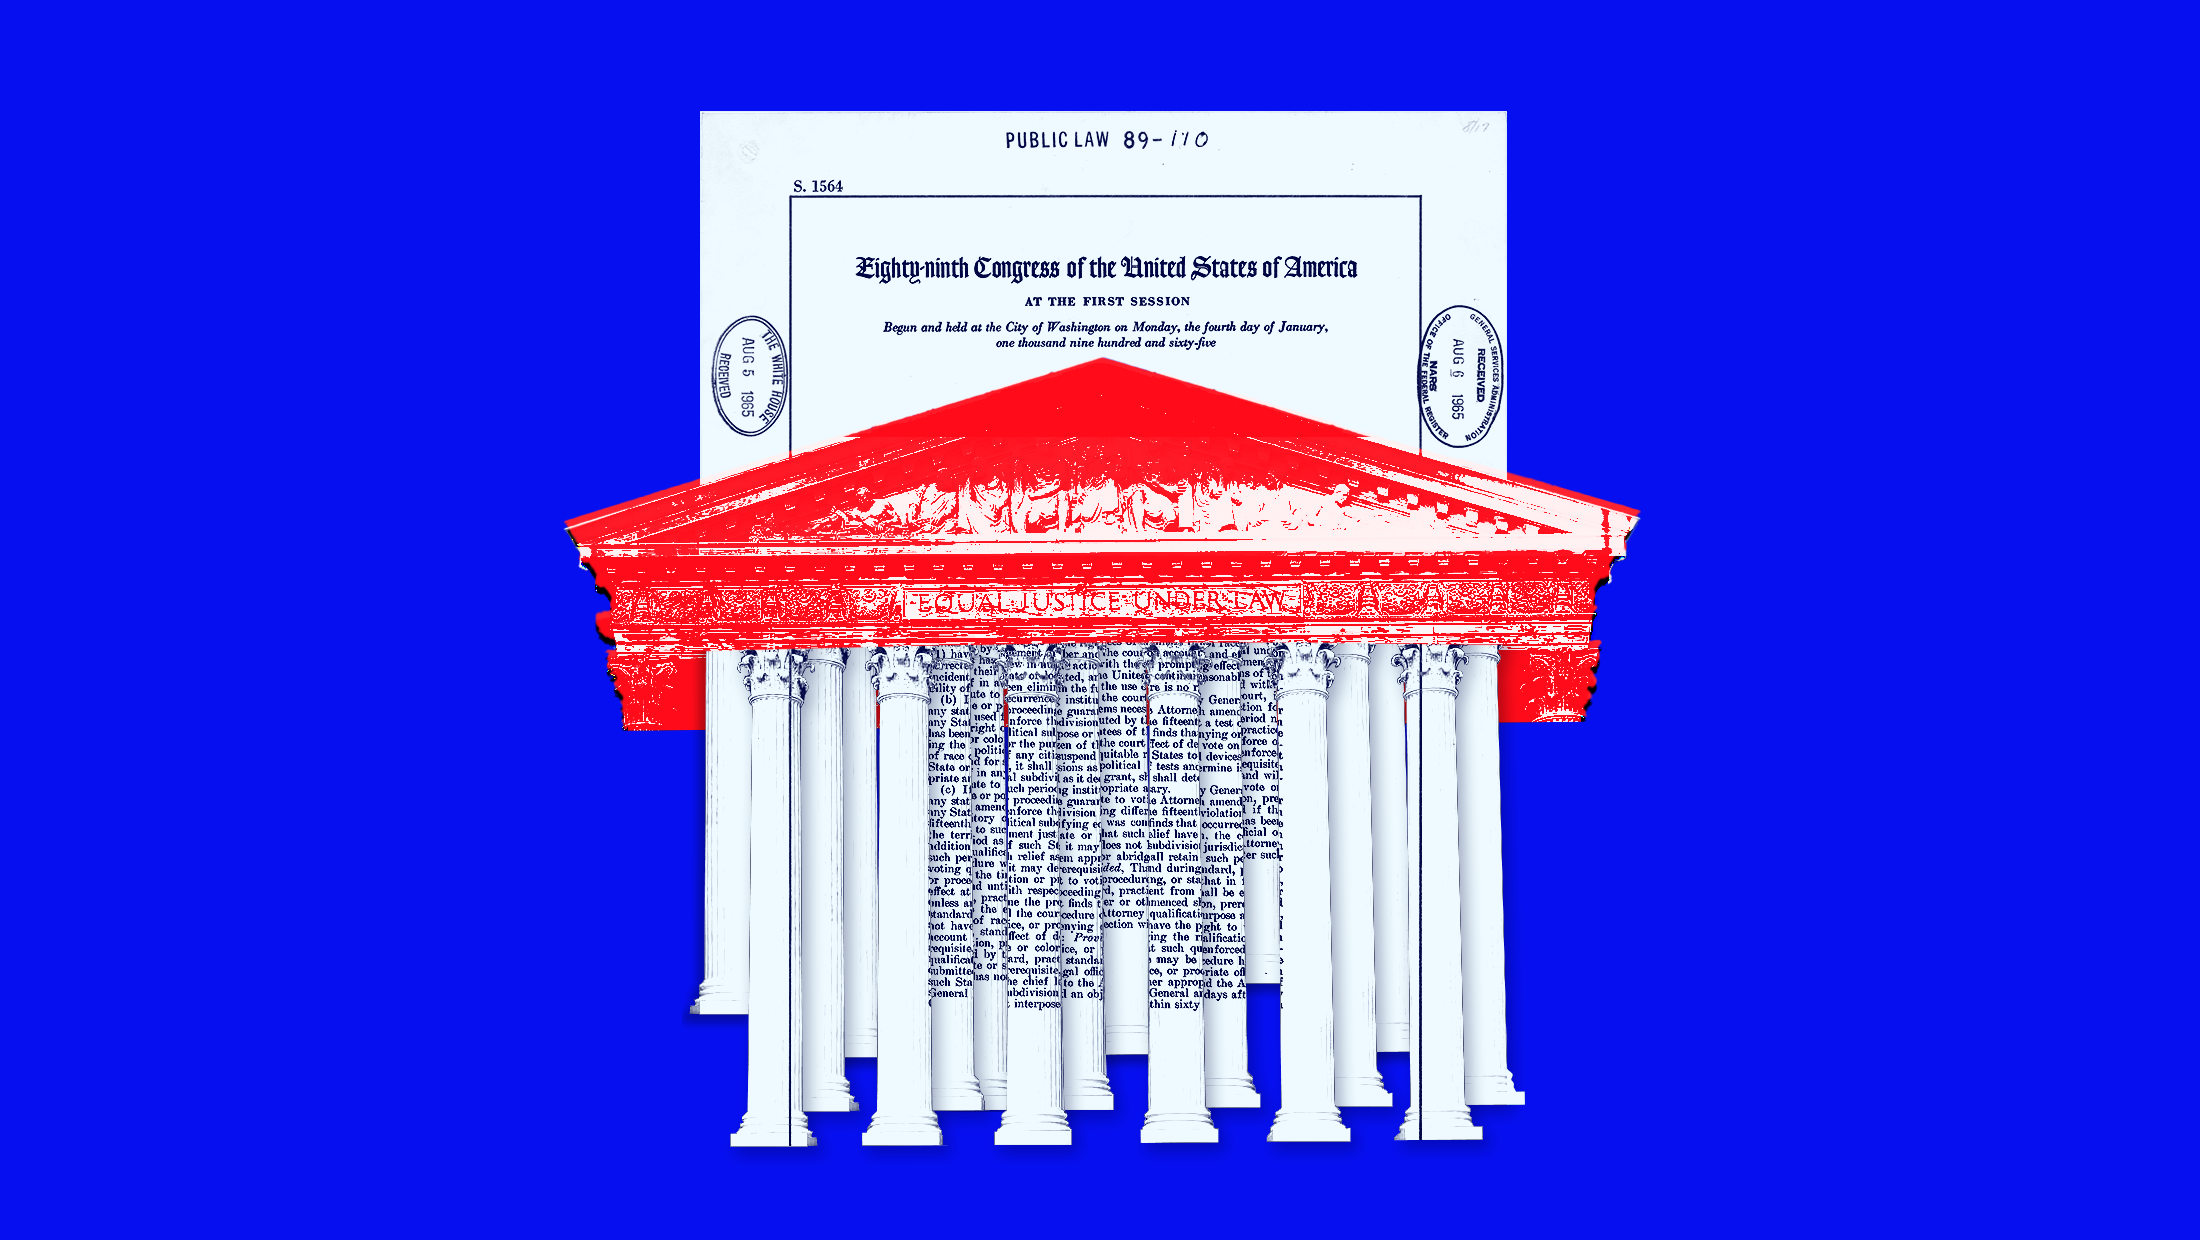 Blue background with a white document of the Voting Rights Act of 1965 being put through a red-toned pediment of the U.S. Supreme Court and the document is being shredded through it into columns